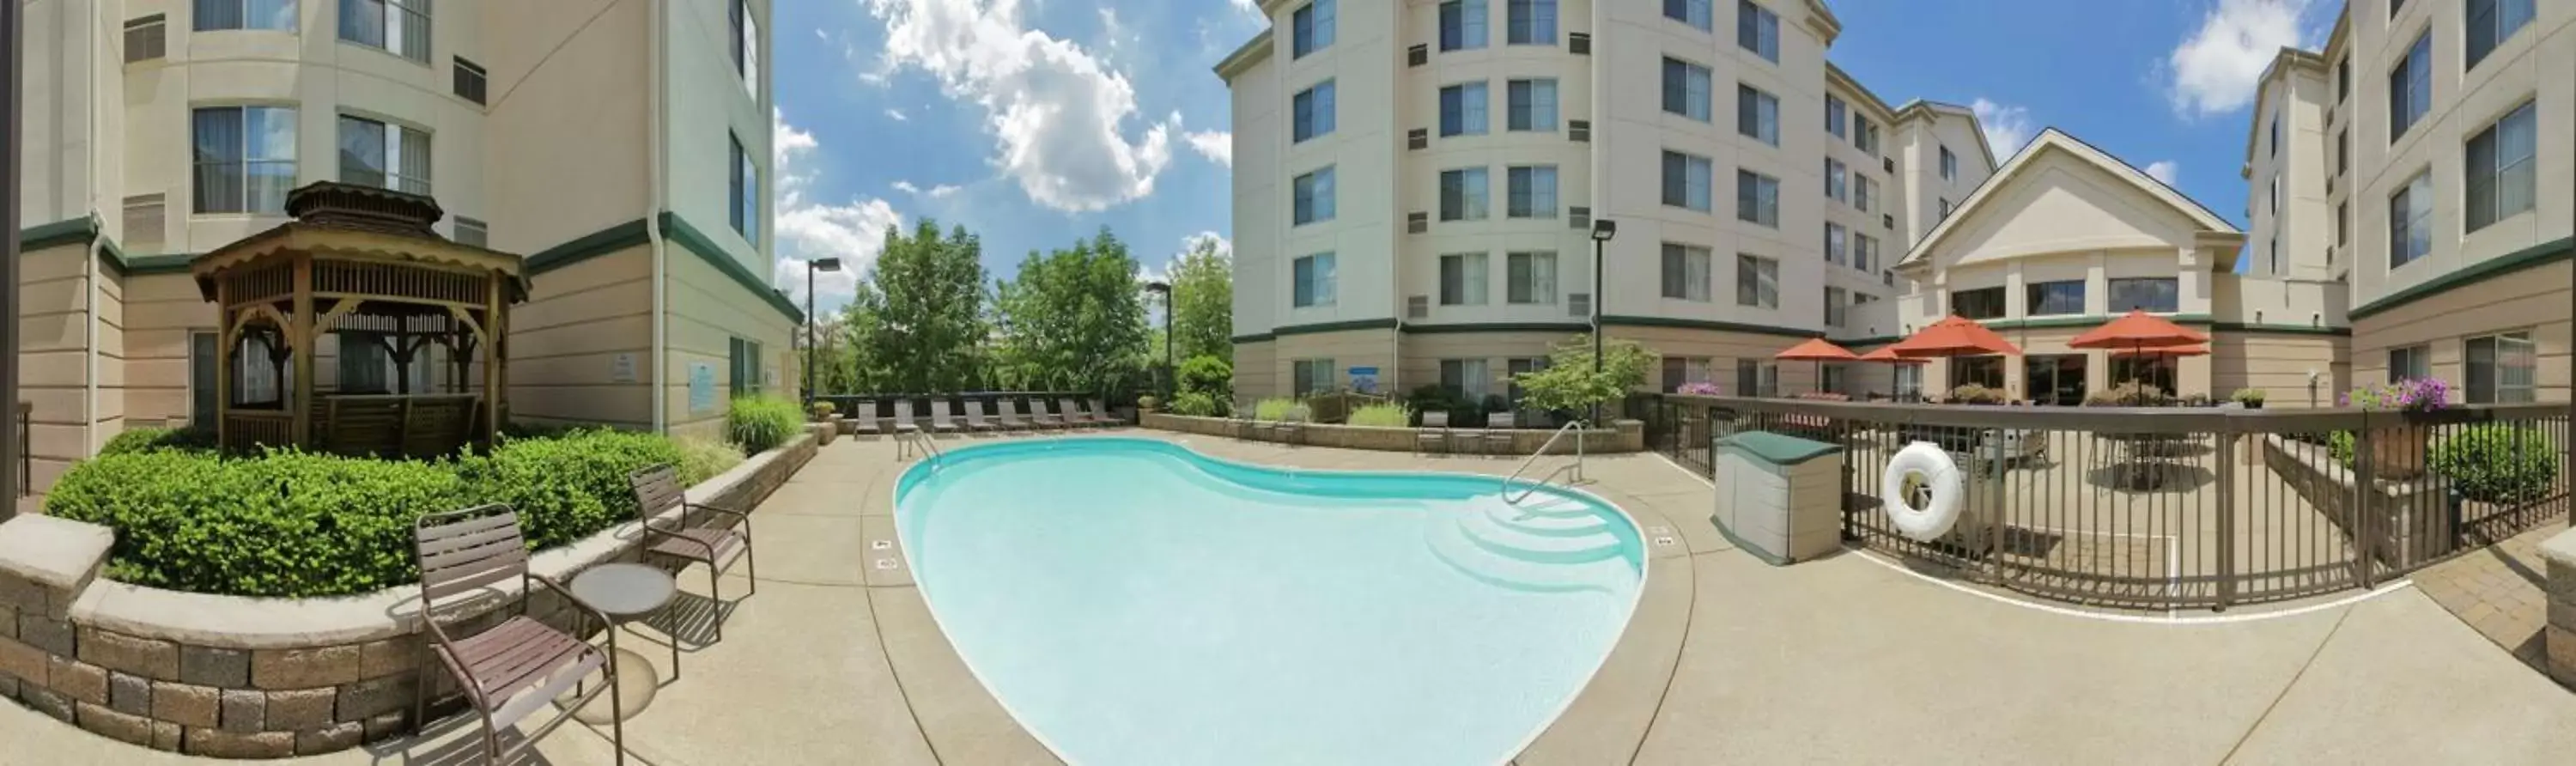 Swimming Pool in Homewood Suites by Hilton Dayton South